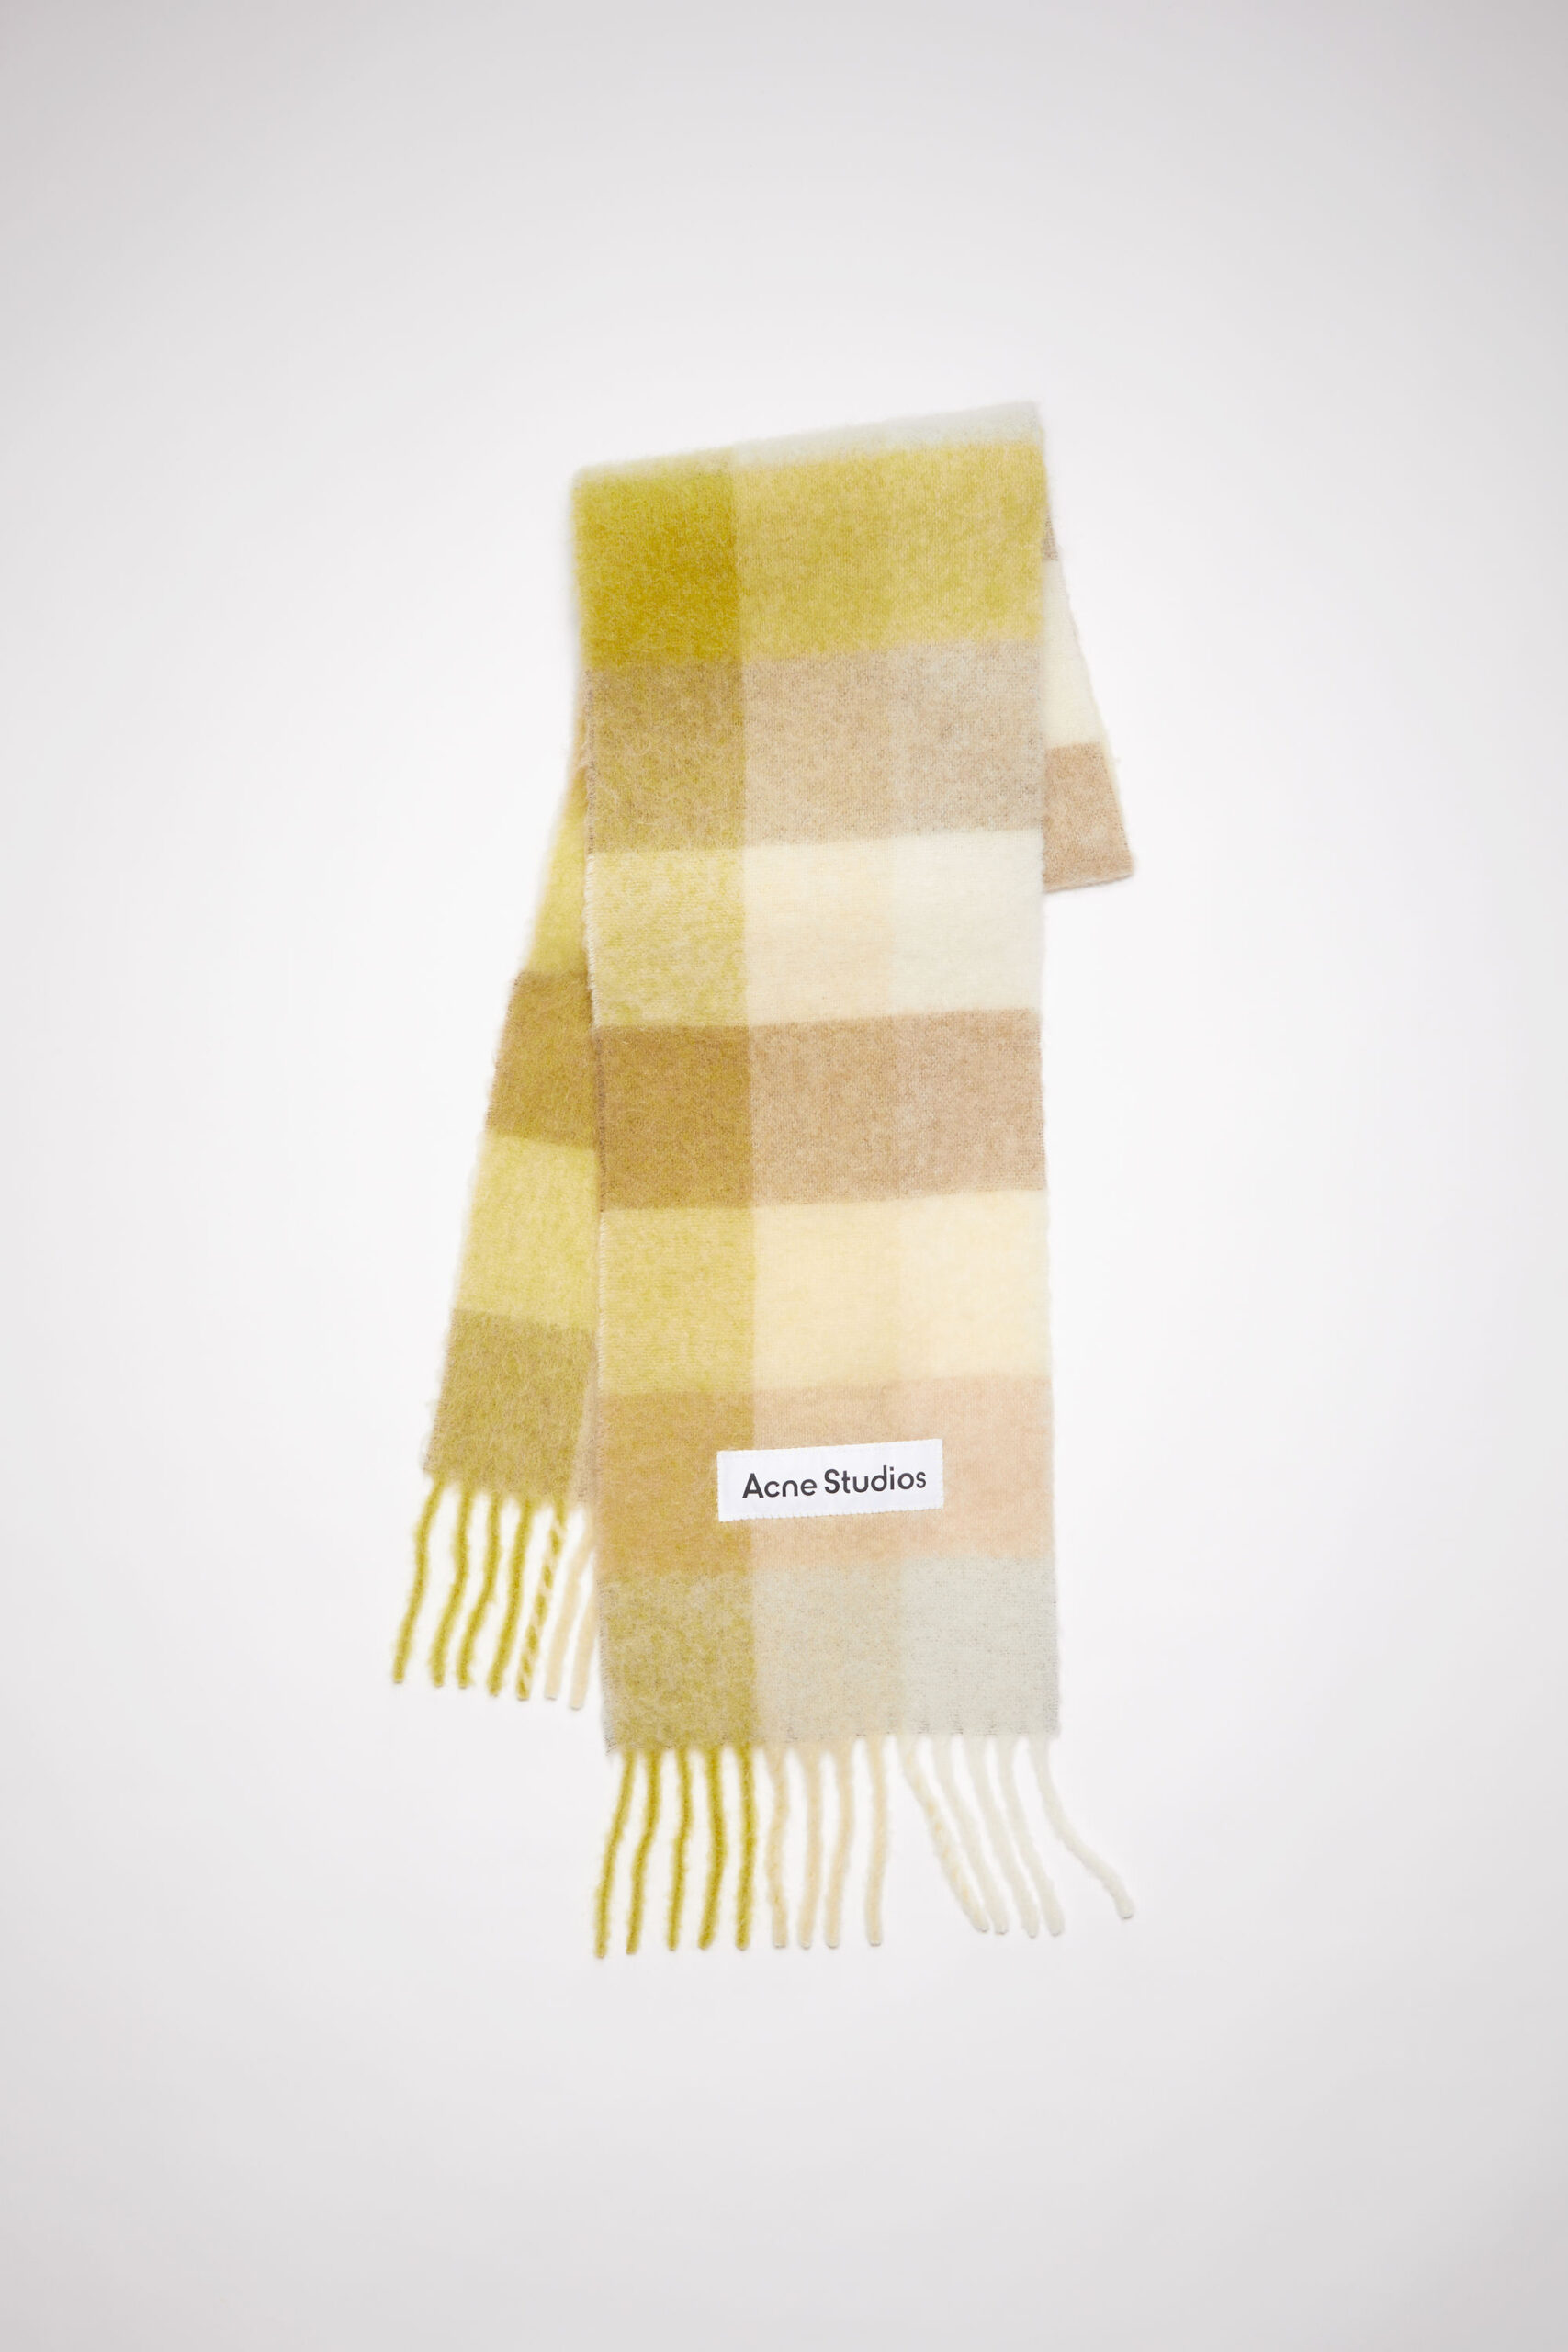 An Acne Studio sustainable scarf.